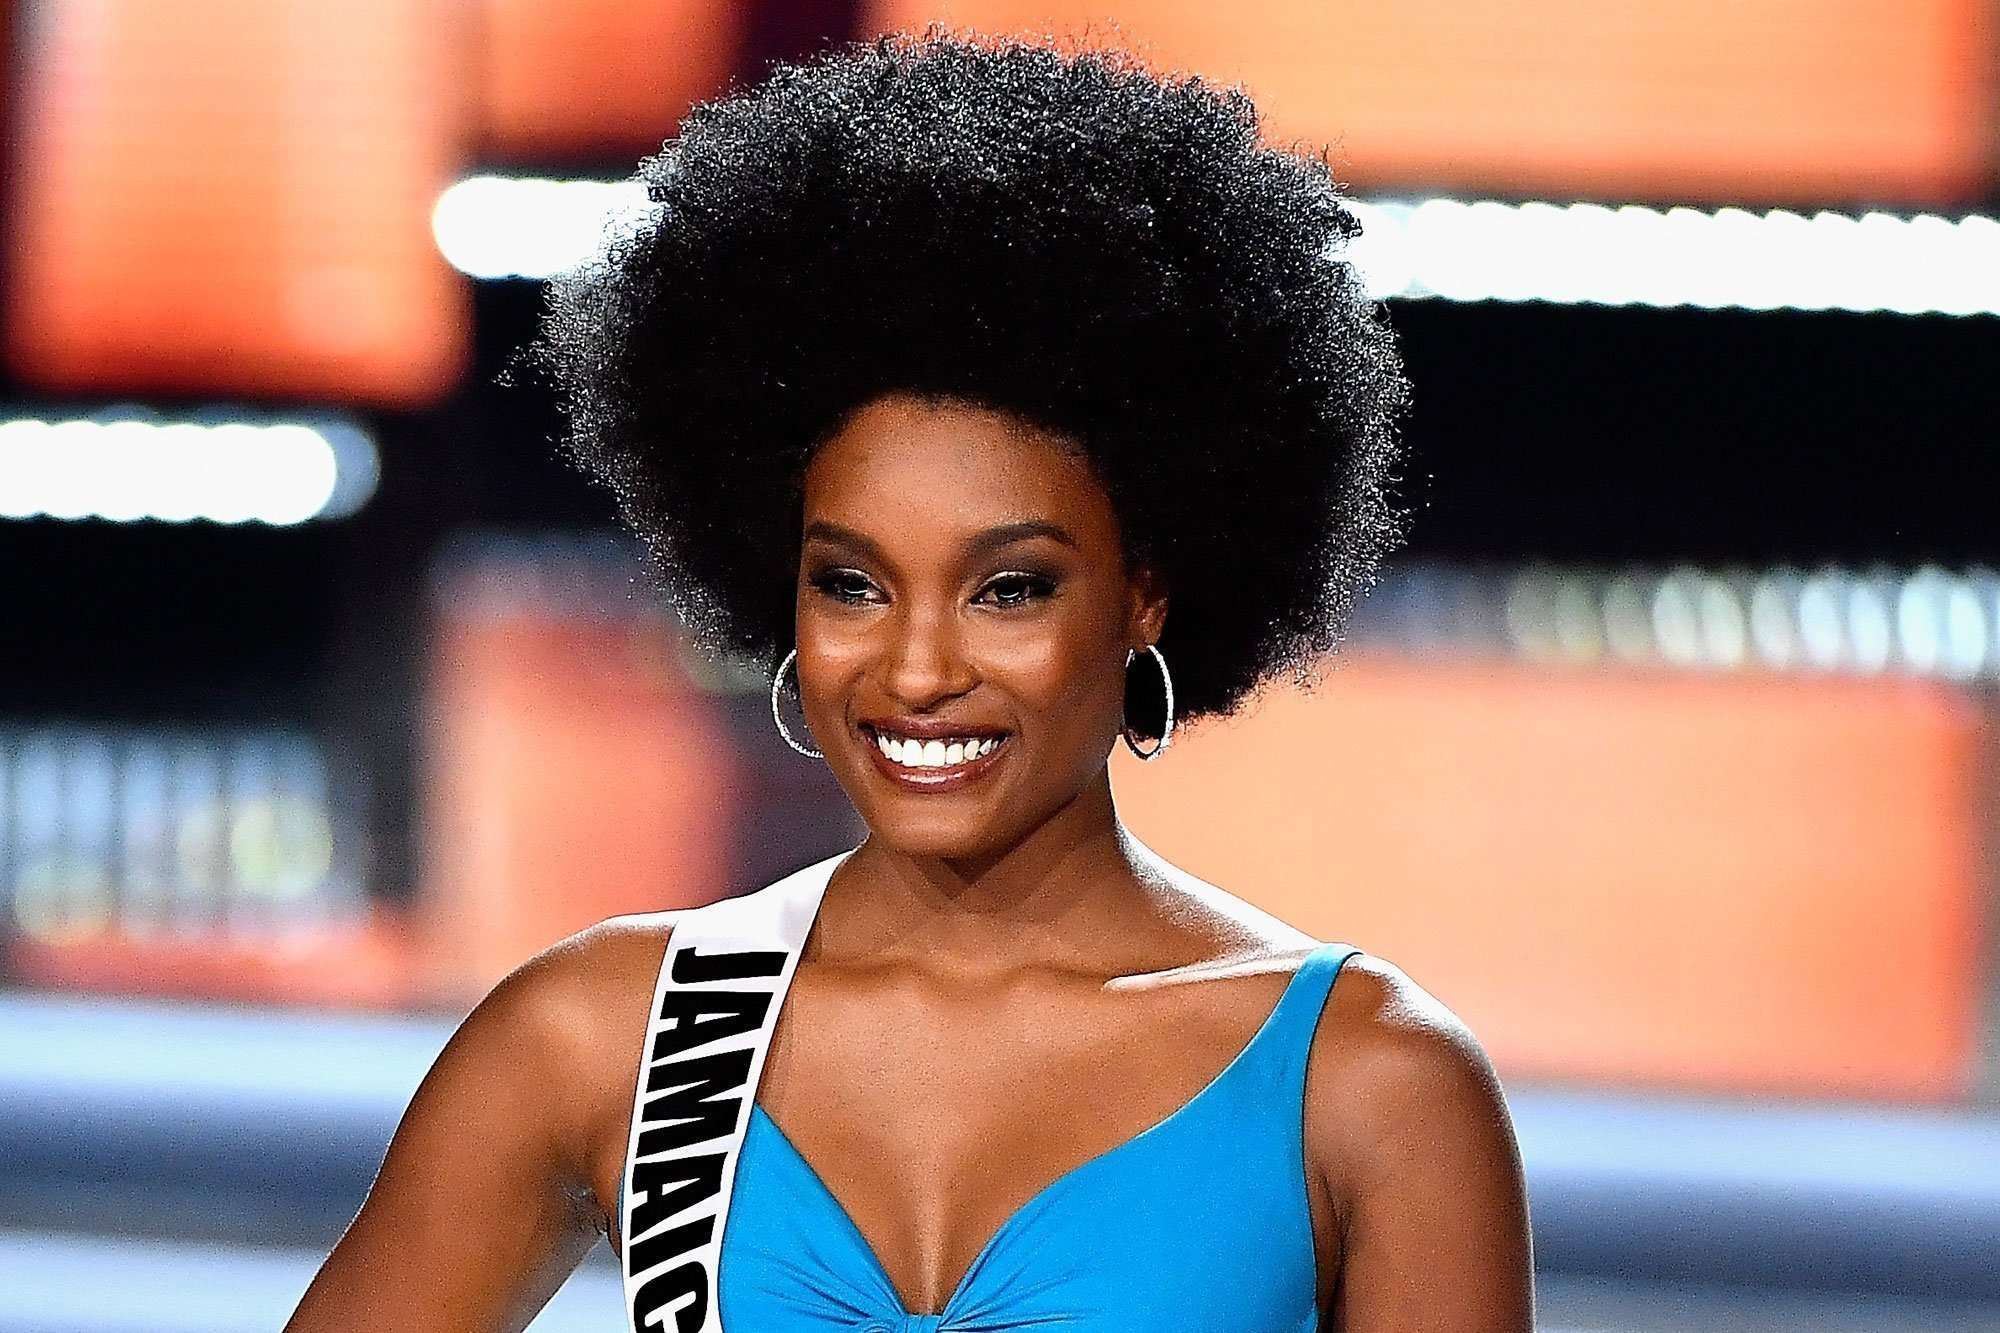 Miss Jamaica with her natural hair afro